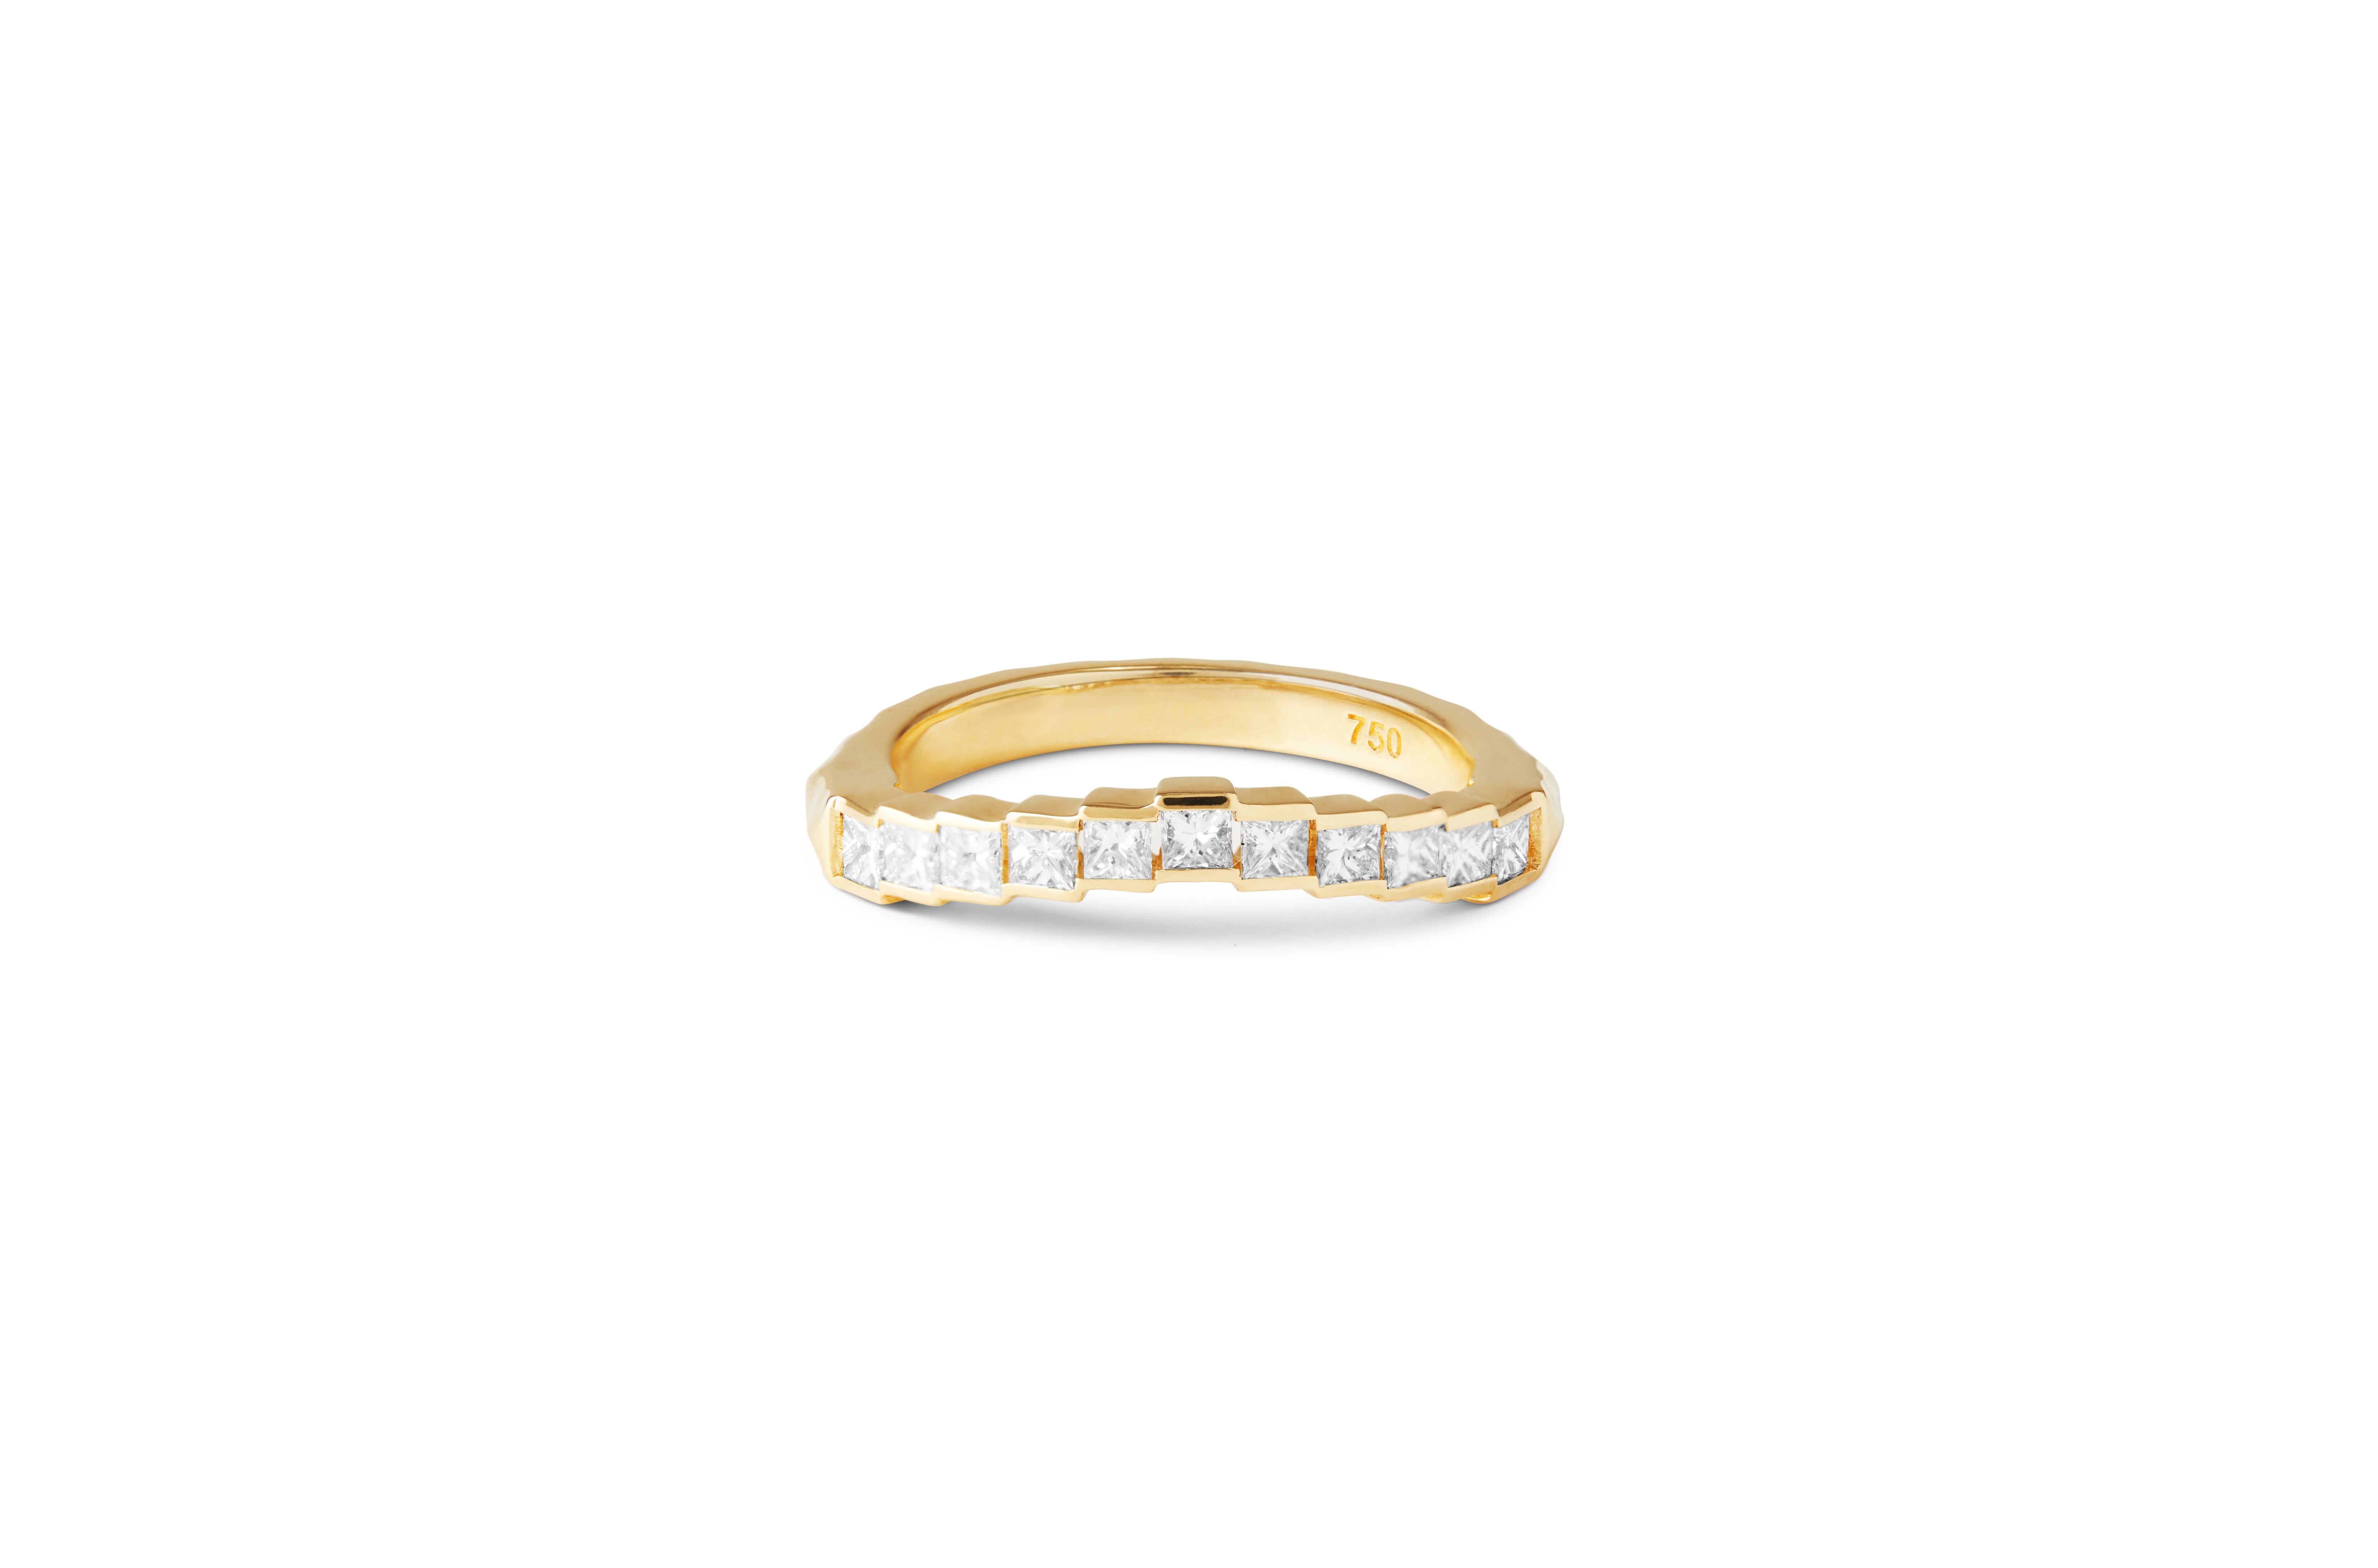 Past, Present for Future

18ct yellow gold with channel set 2mm diamonds around top half of the ring.